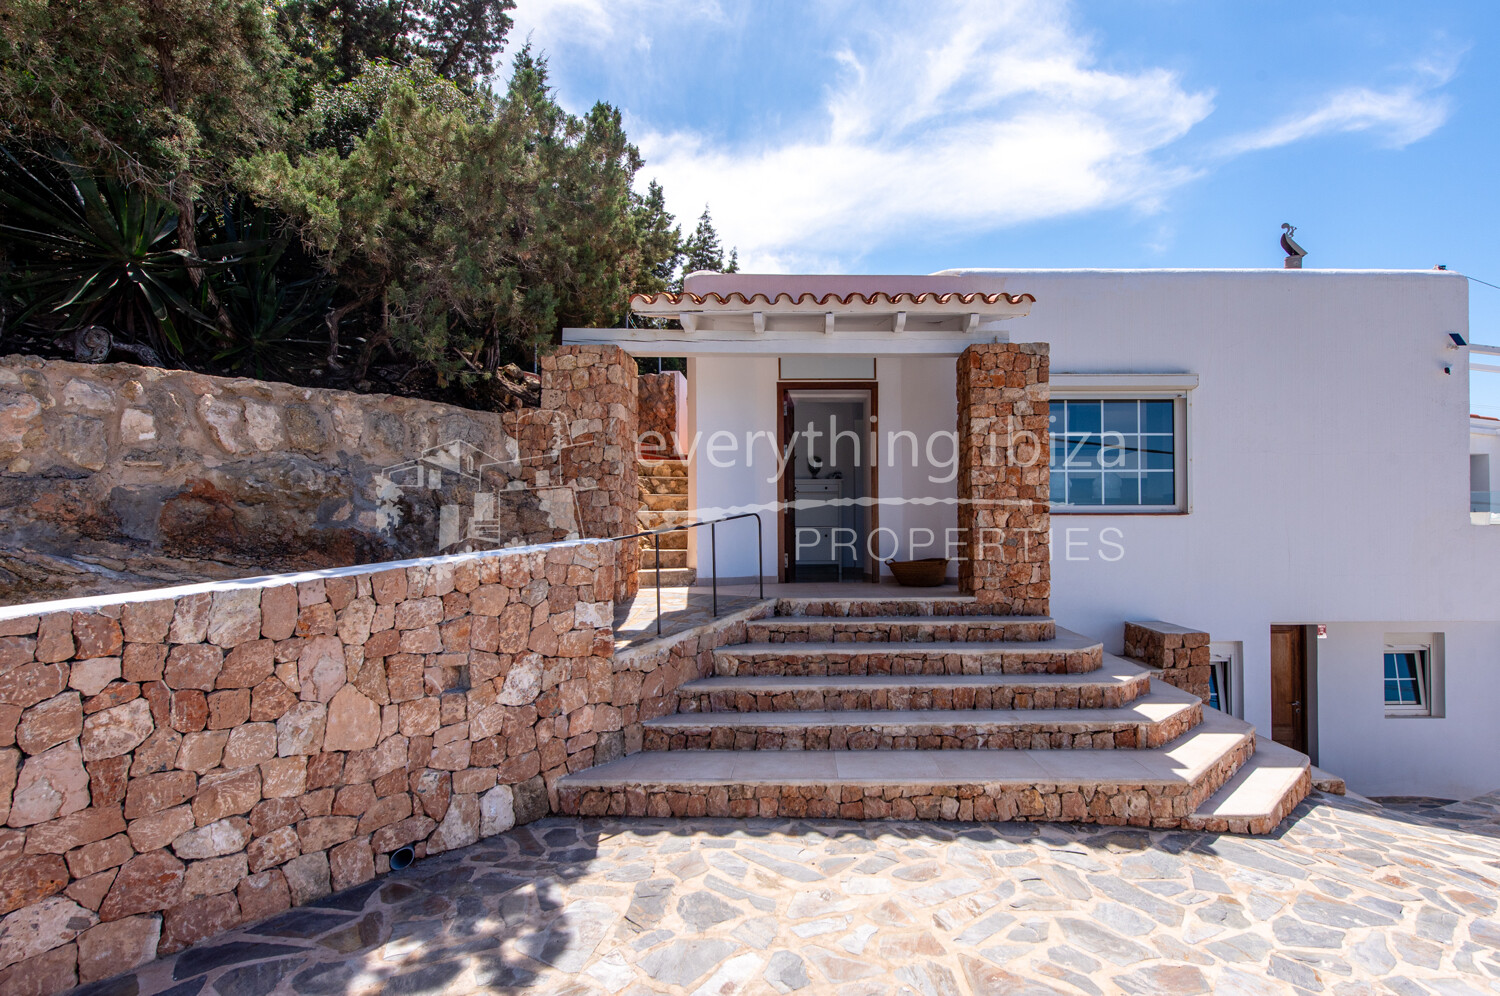 Luxury Elegant Modern Villa with Stunning Views and Close to Beaches, ref. 1708, for sale in Ibiza by everything ibiza Properties